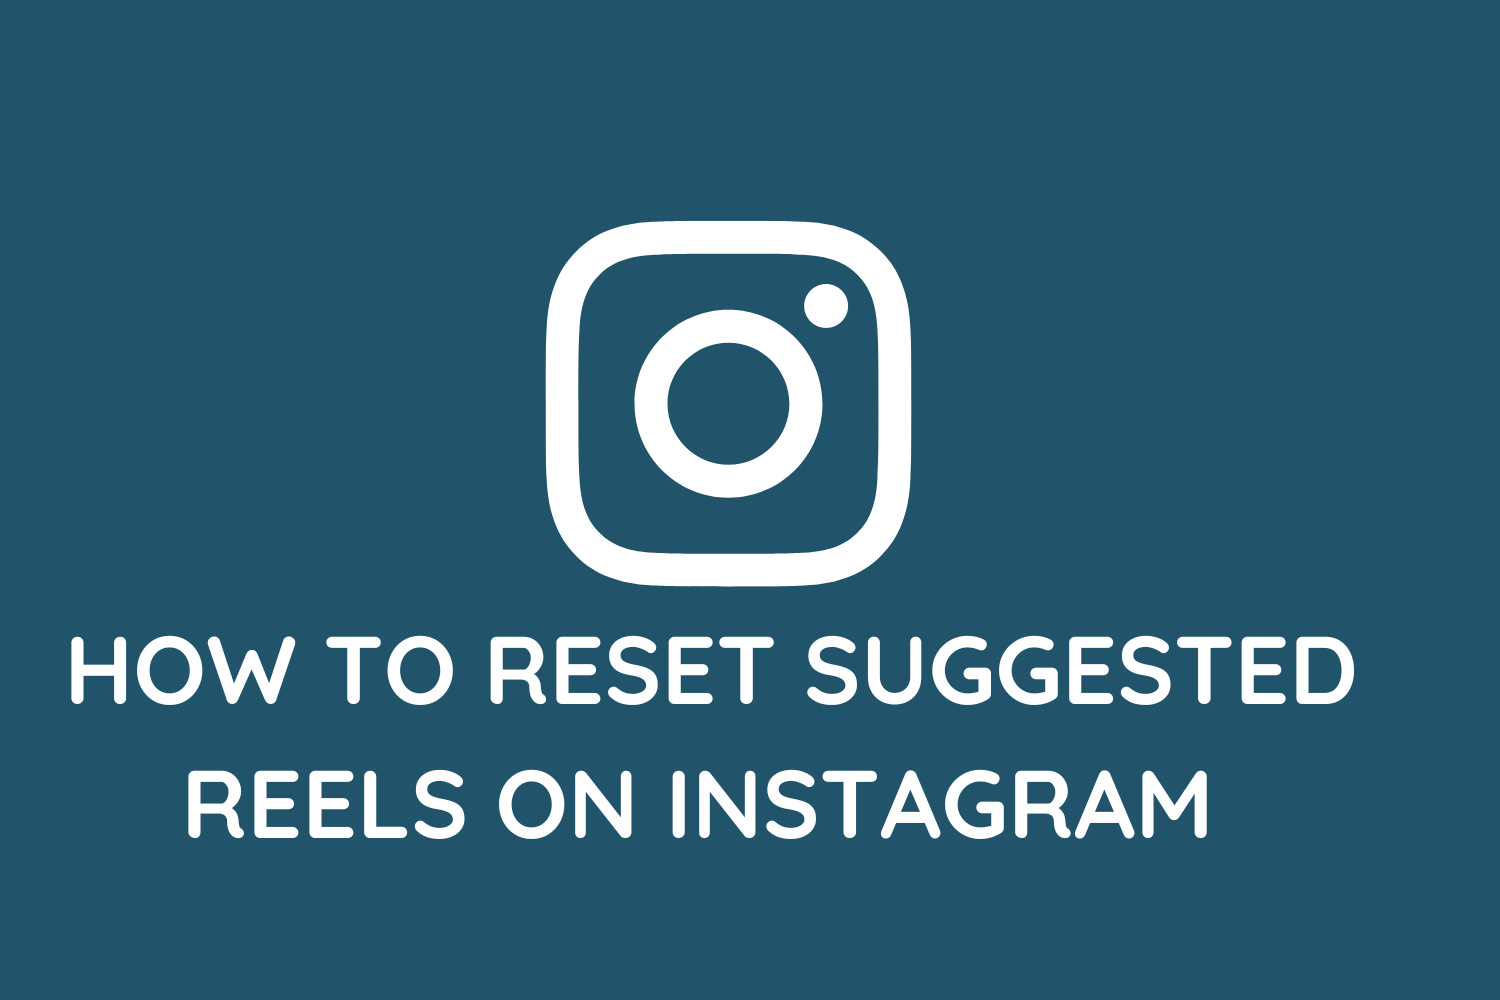 How To Reset Suggested Reels On Instagram